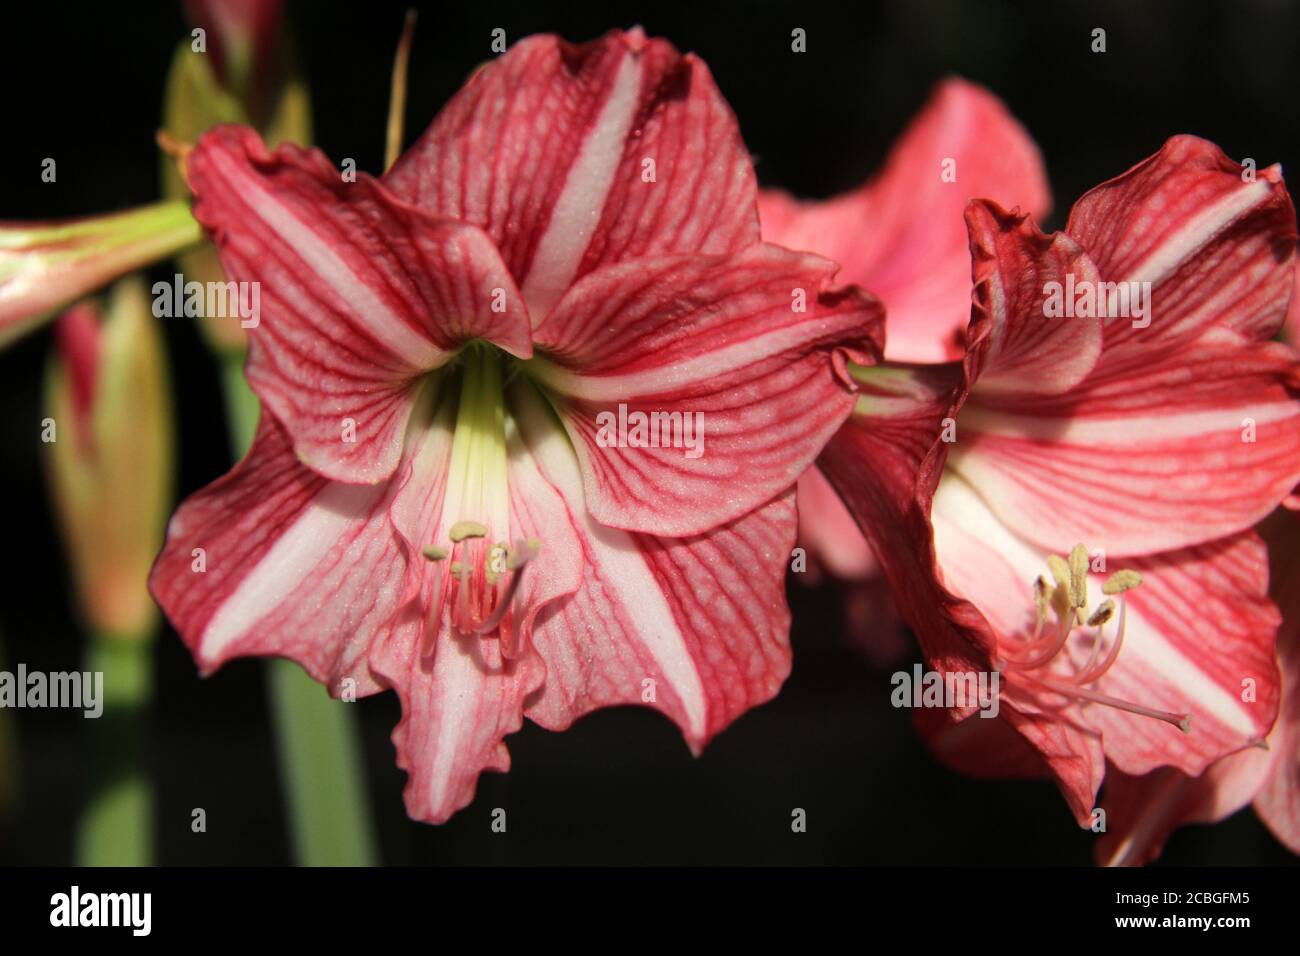 Close-up of pink striped day-lilies in bloom Stock Photo